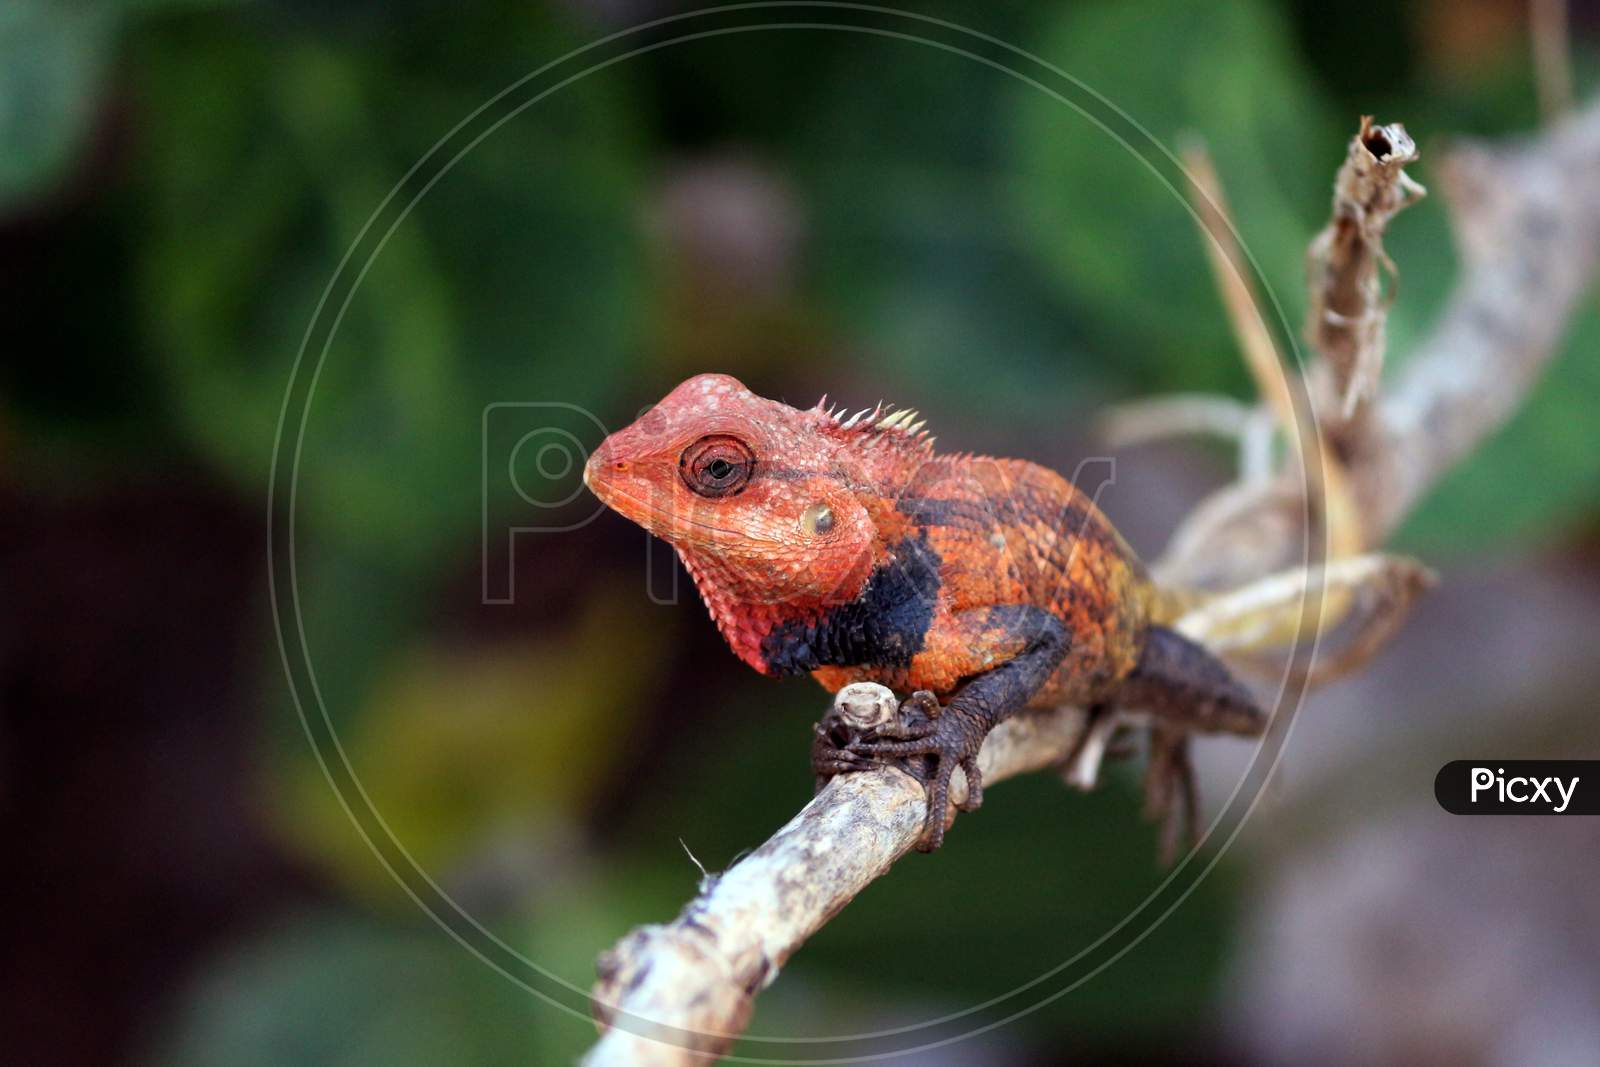 colour changing reptile on a stick